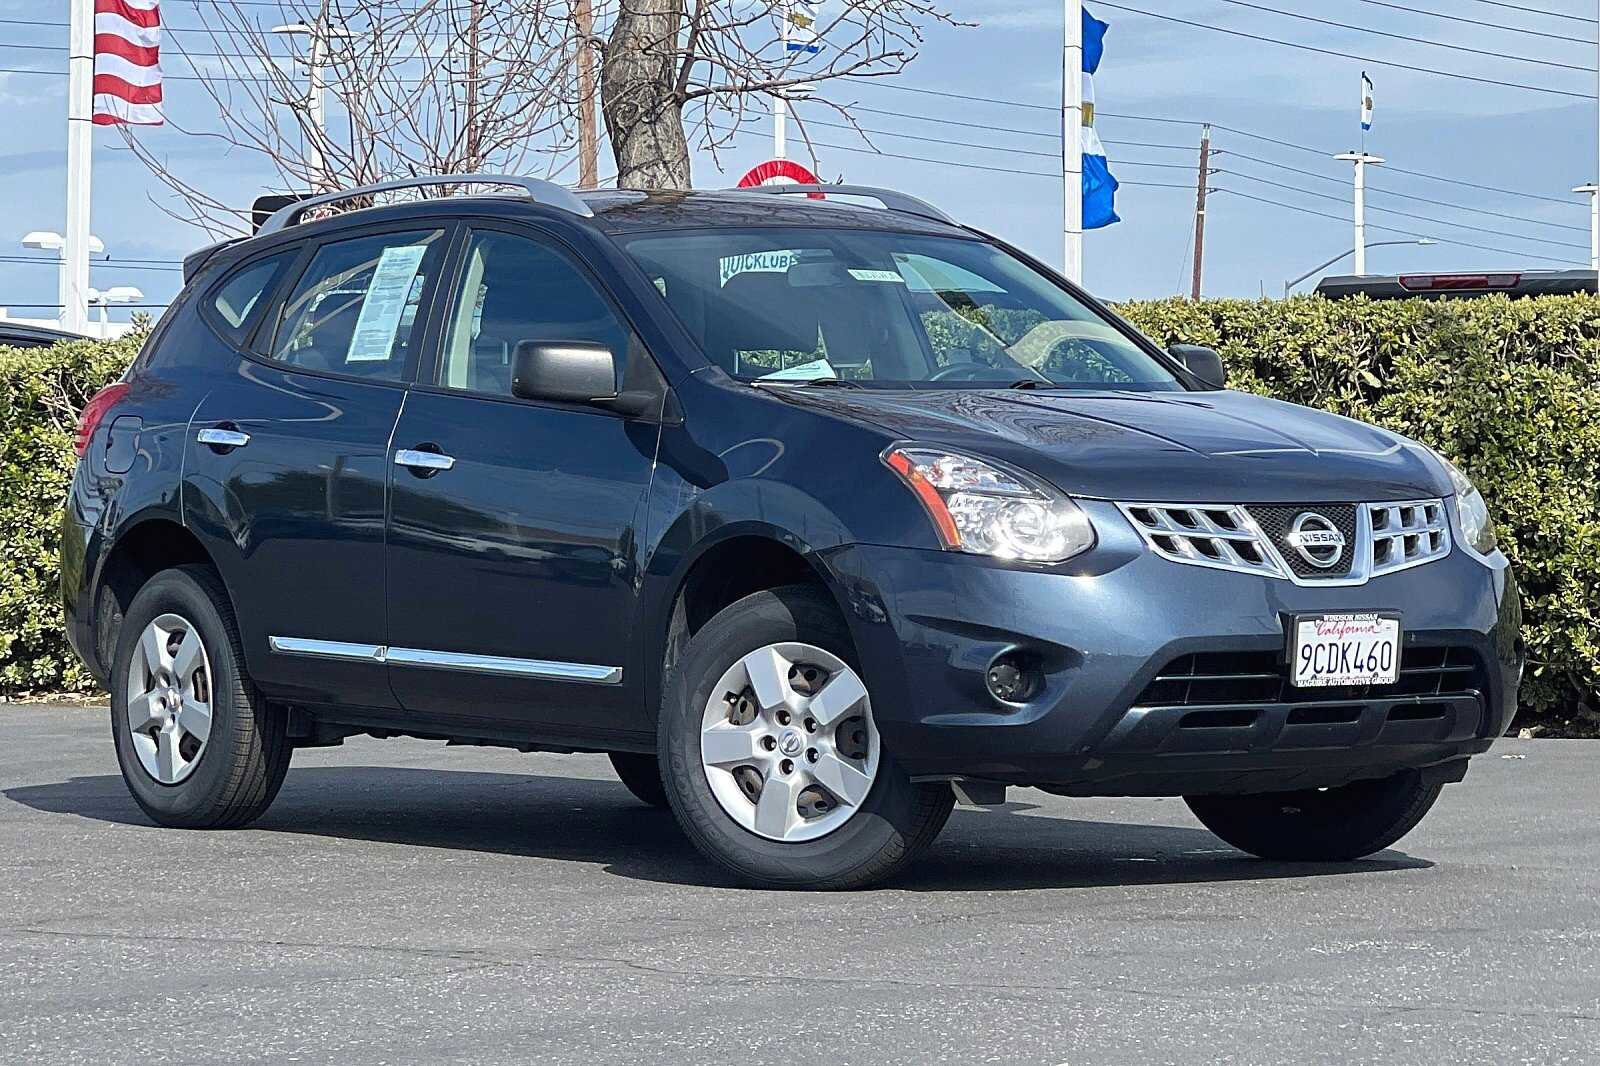 Pre-Owned 2015 Nissan Rogue Select S Sport Utility in Modesto #HN12126A |  Central Valley Volkswagen